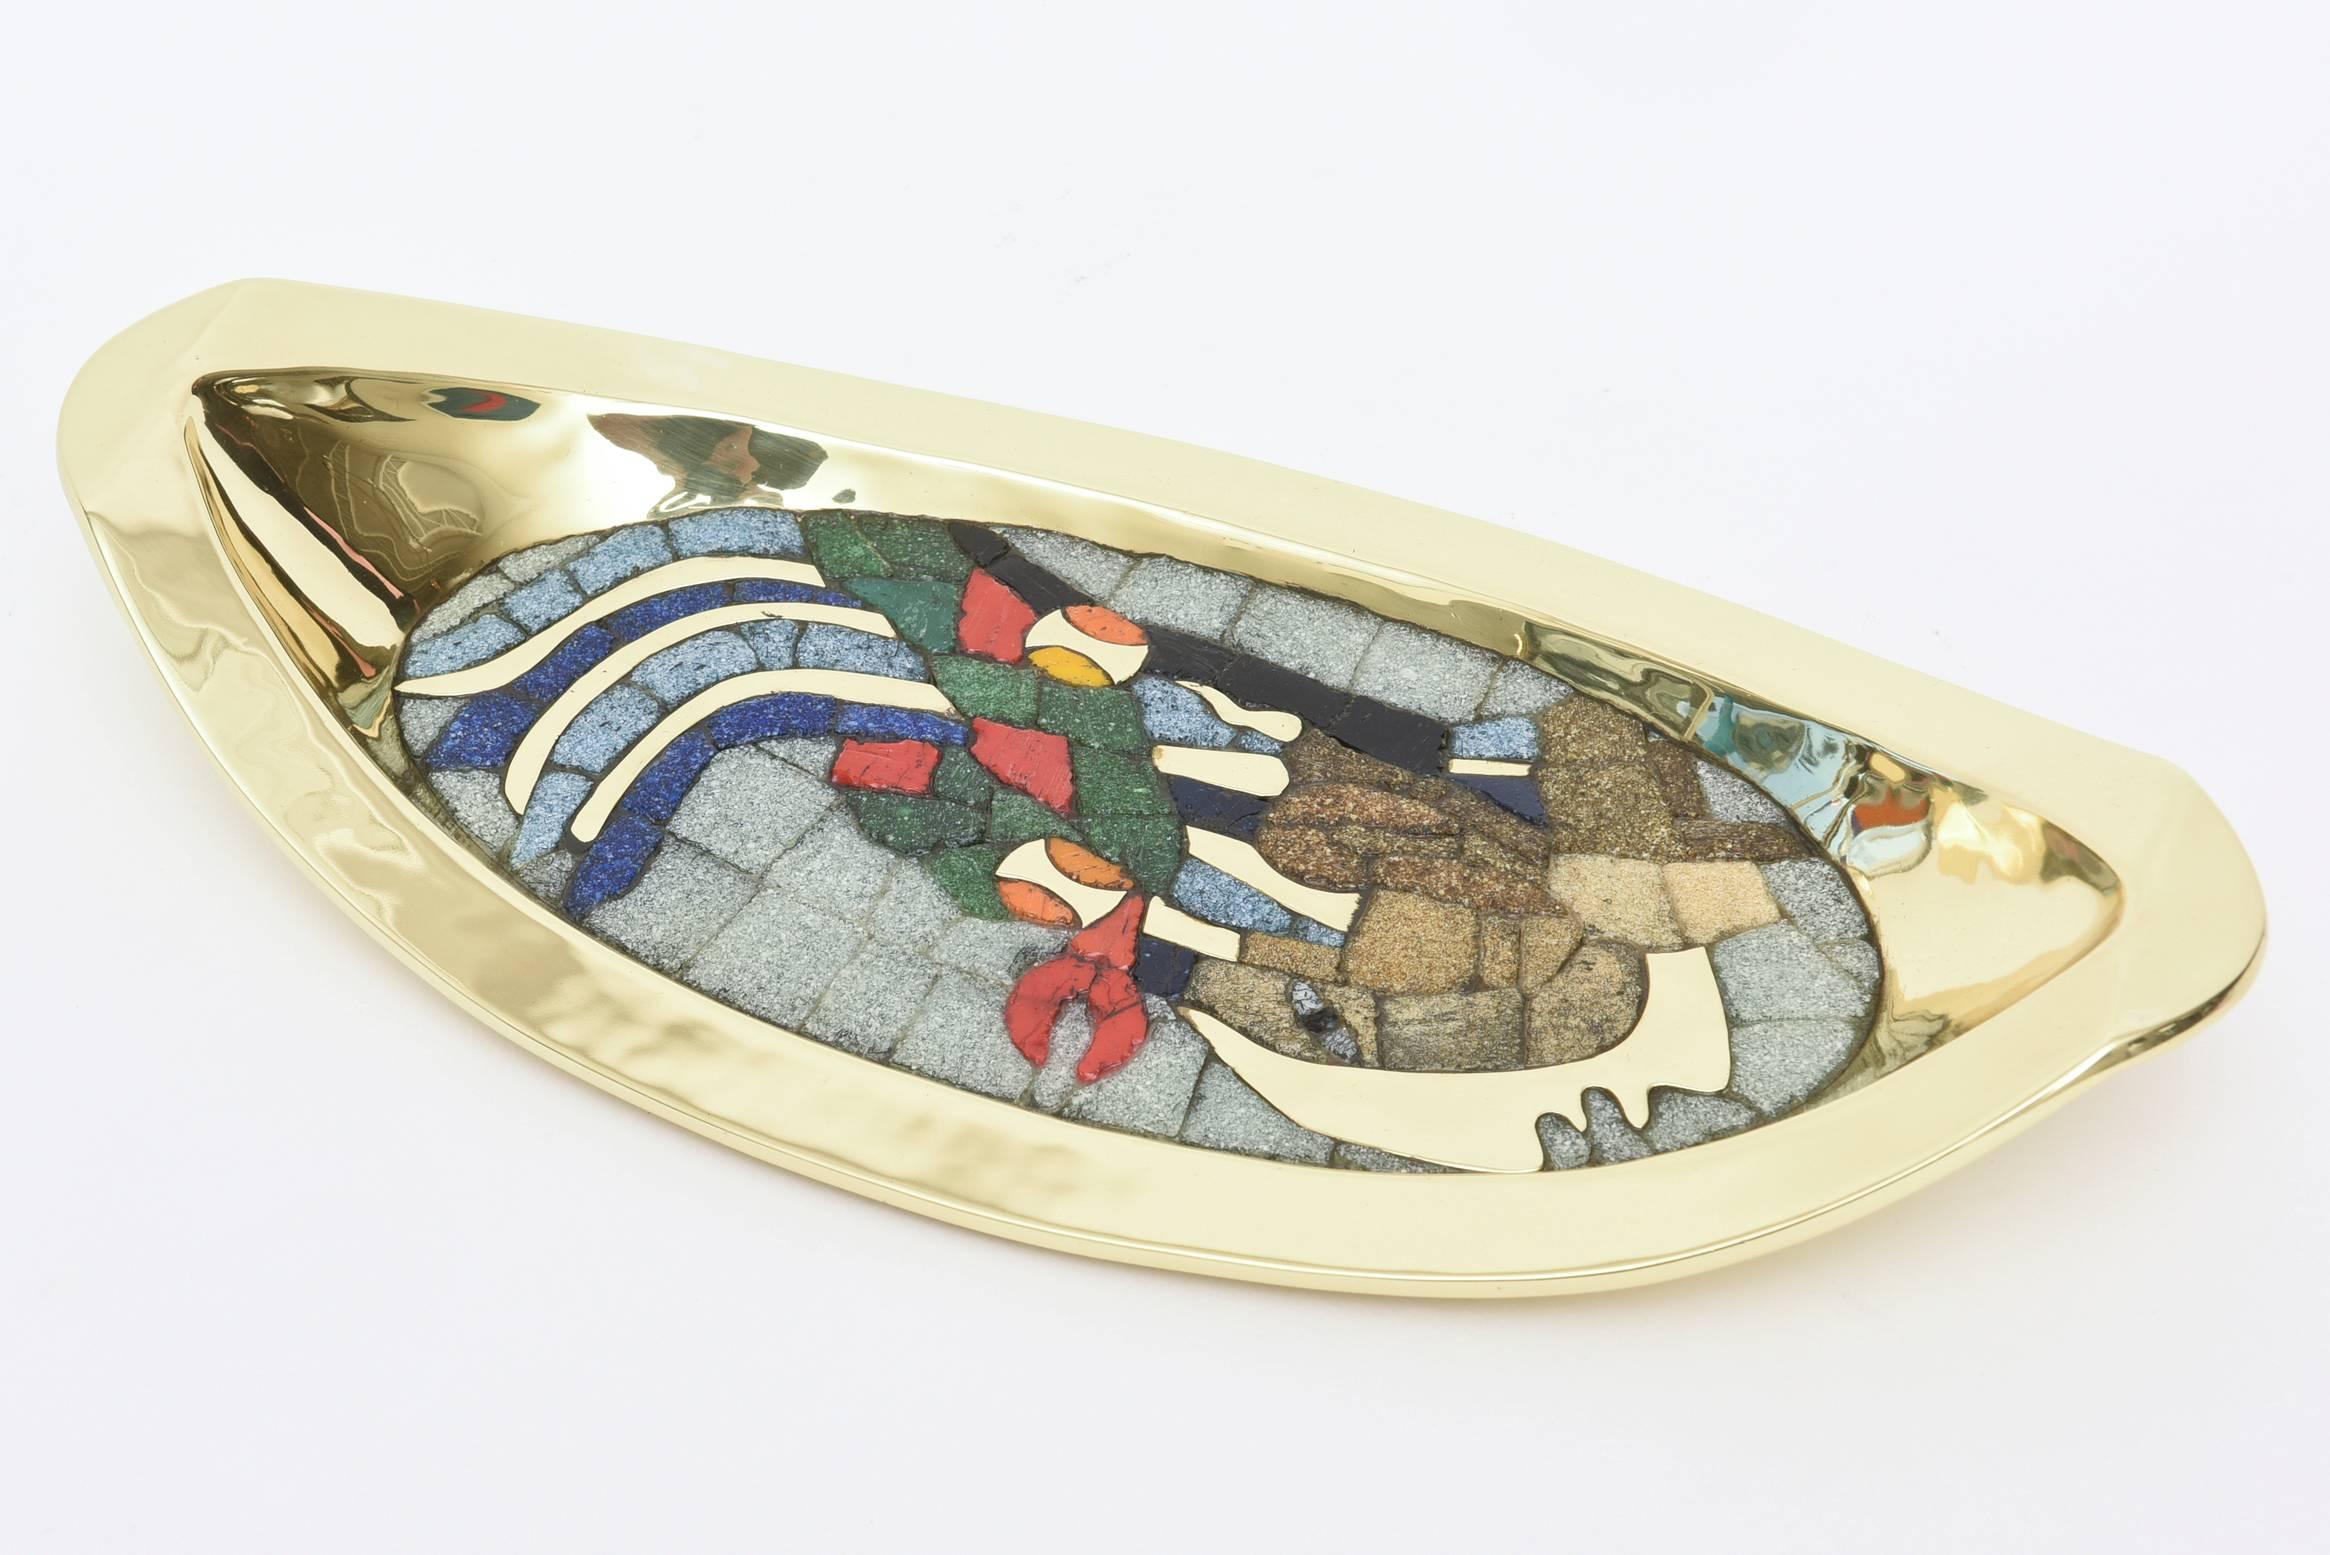 Beautiful array of glass mosaic against the polished brass sculptural bowl/object in this attributed and style of the Mexican metalsmith; Salvador Teran work of art.
The colors that are depicted are royal blue, green, orange, mustard yellow, brown,